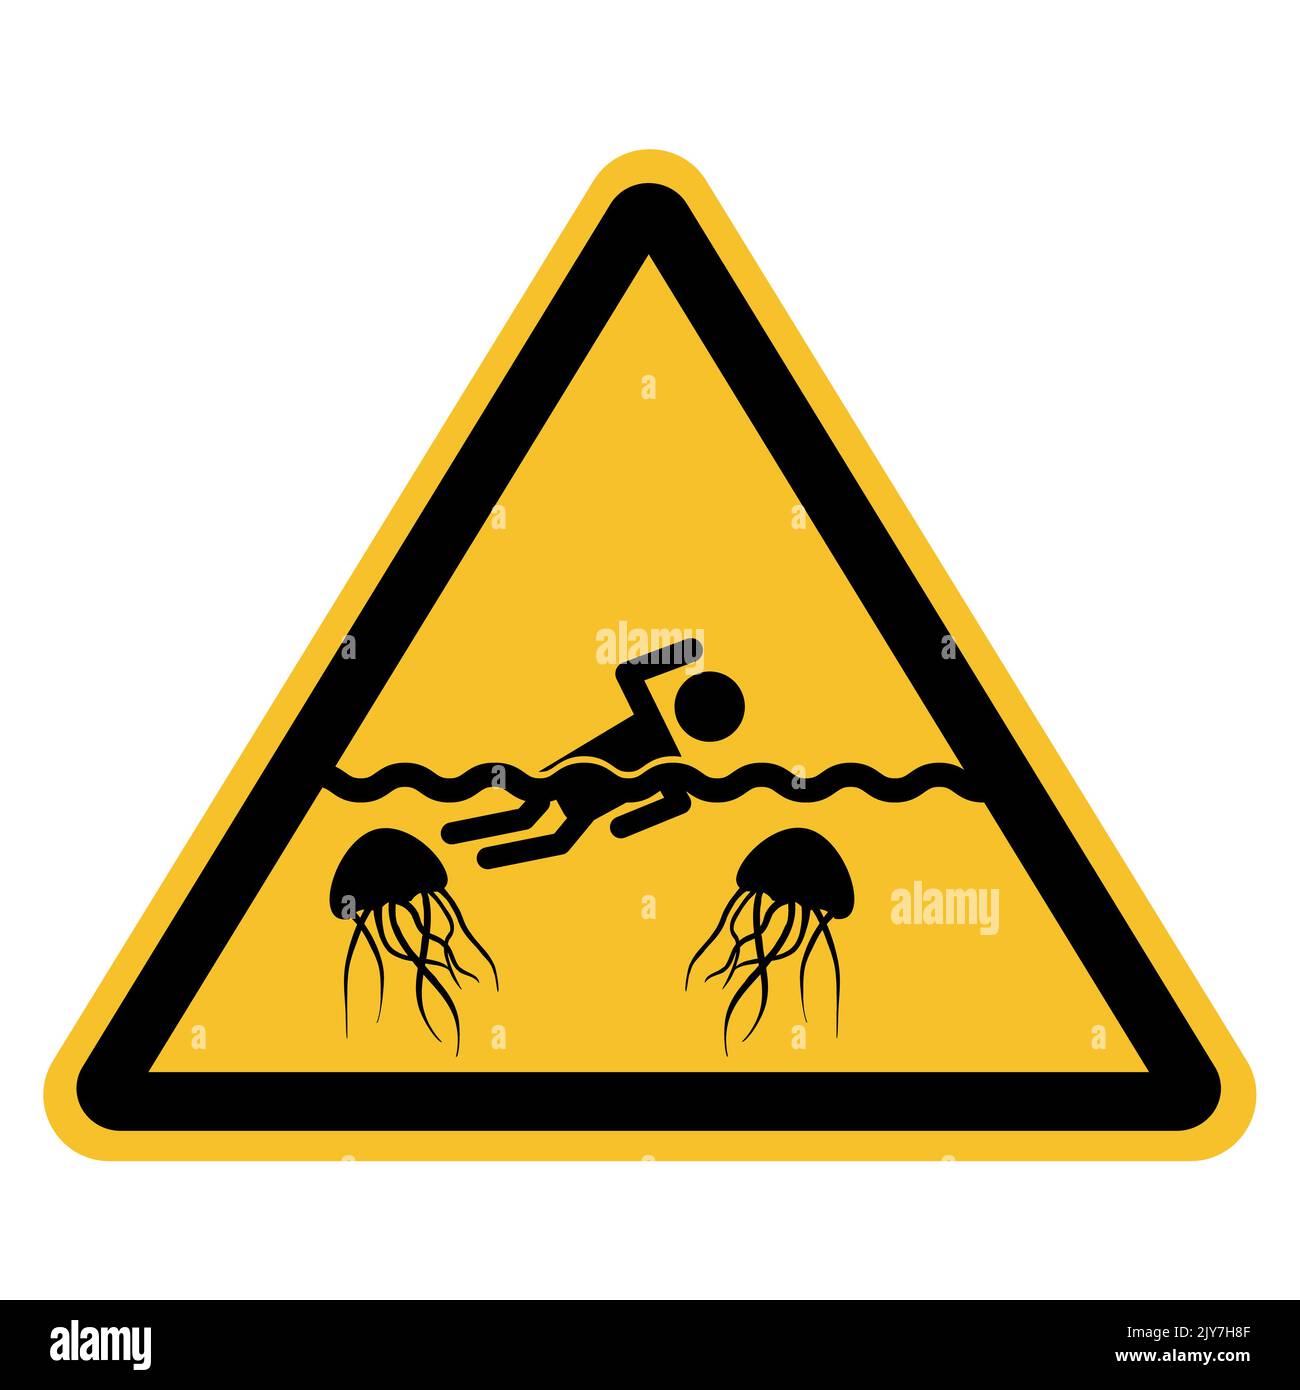 warning beware of jellyfish icon on white background. sea jellyfish and swimmer on the sign. flat style. Stock Photo